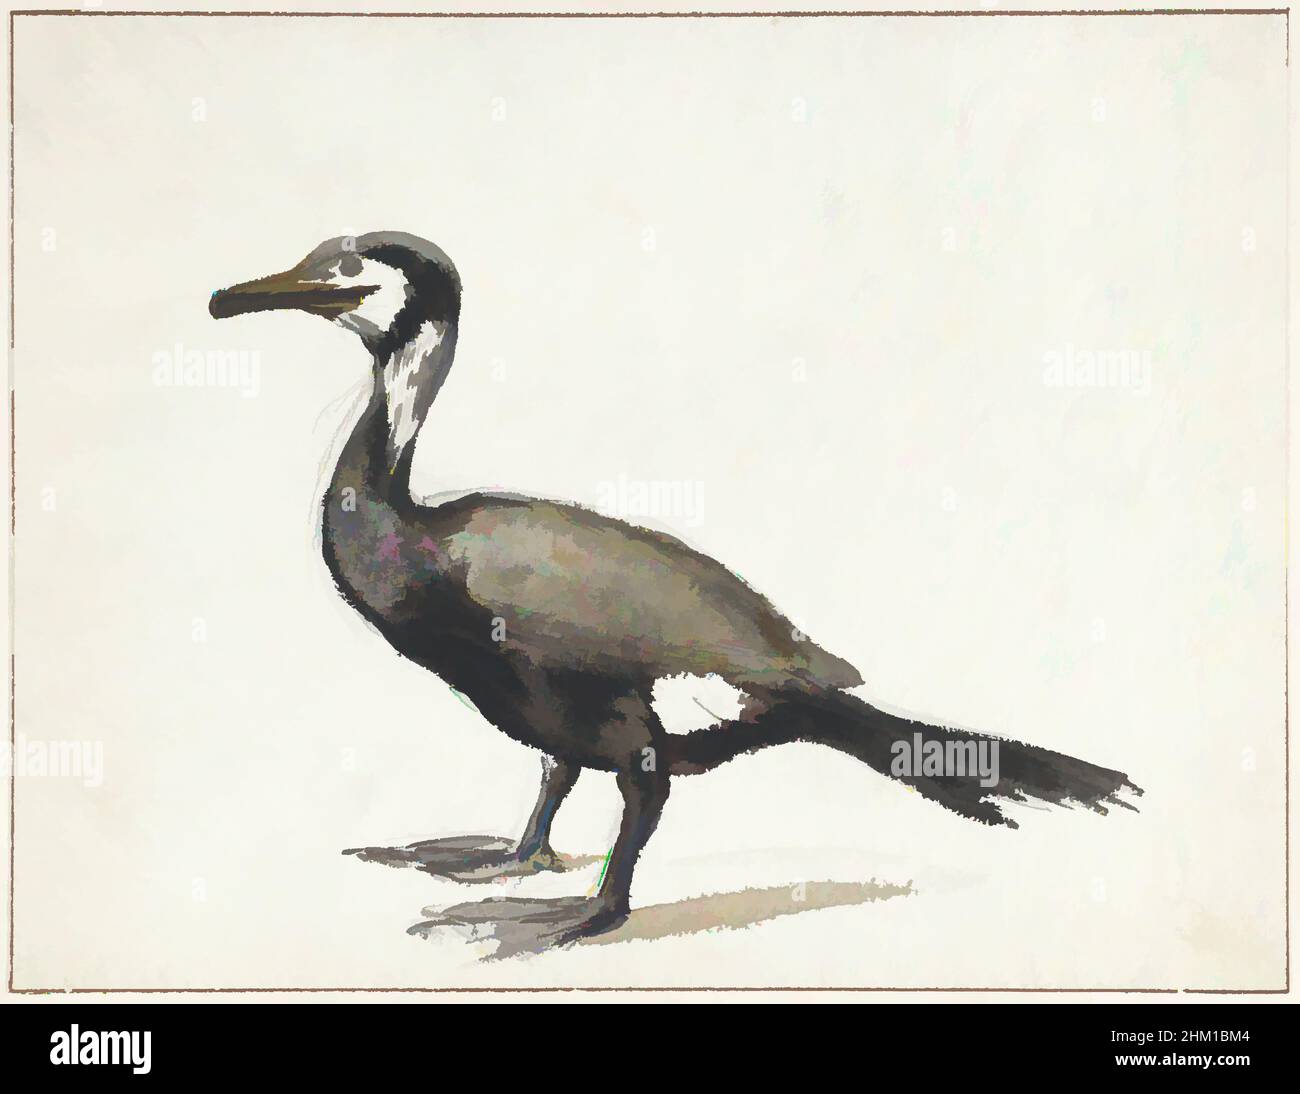 Art inspired by Cormorant, draughtsman: Willem Roelofs (I), 1832 - 1897, paper, pencil, brush, height 226 mm × width 294 mm, Classic works modernized by Artotop with a splash of modernity. Shapes, color and value, eye-catching visual impact on art. Emotions through freedom of artworks in a contemporary way. A timeless message pursuing a wildly creative new direction. Artists turning to the digital medium and creating the Artotop NFT Stock Photo